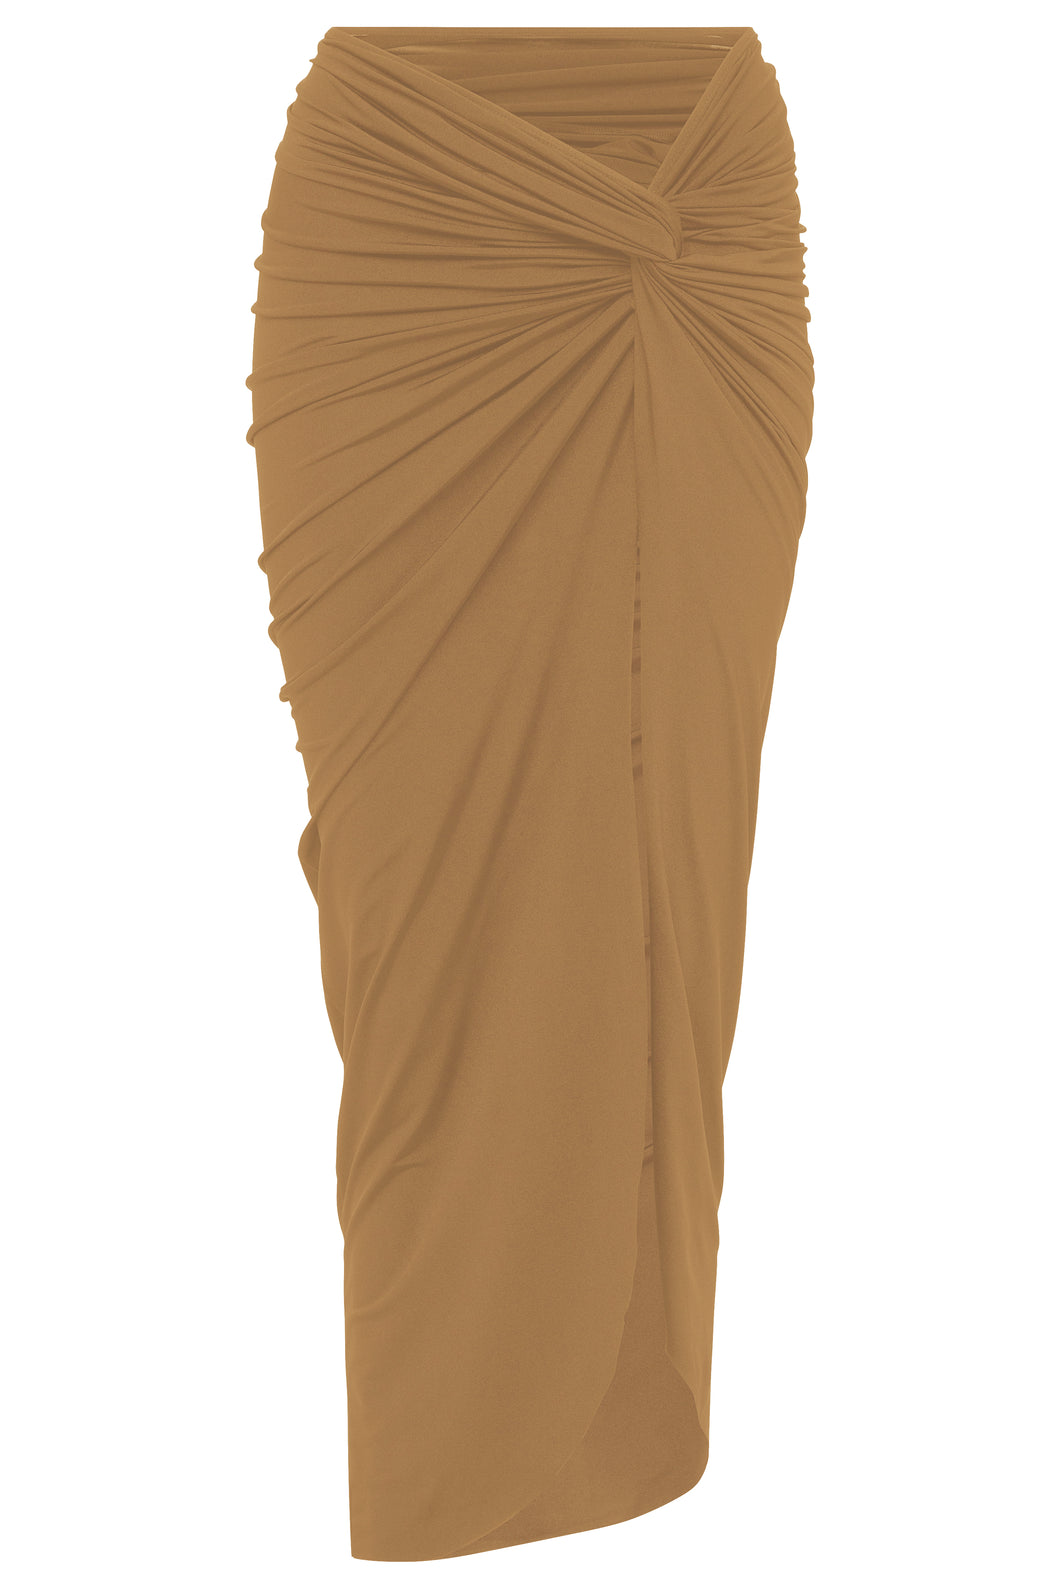 Flat image of the Zena Skirt Long in chai